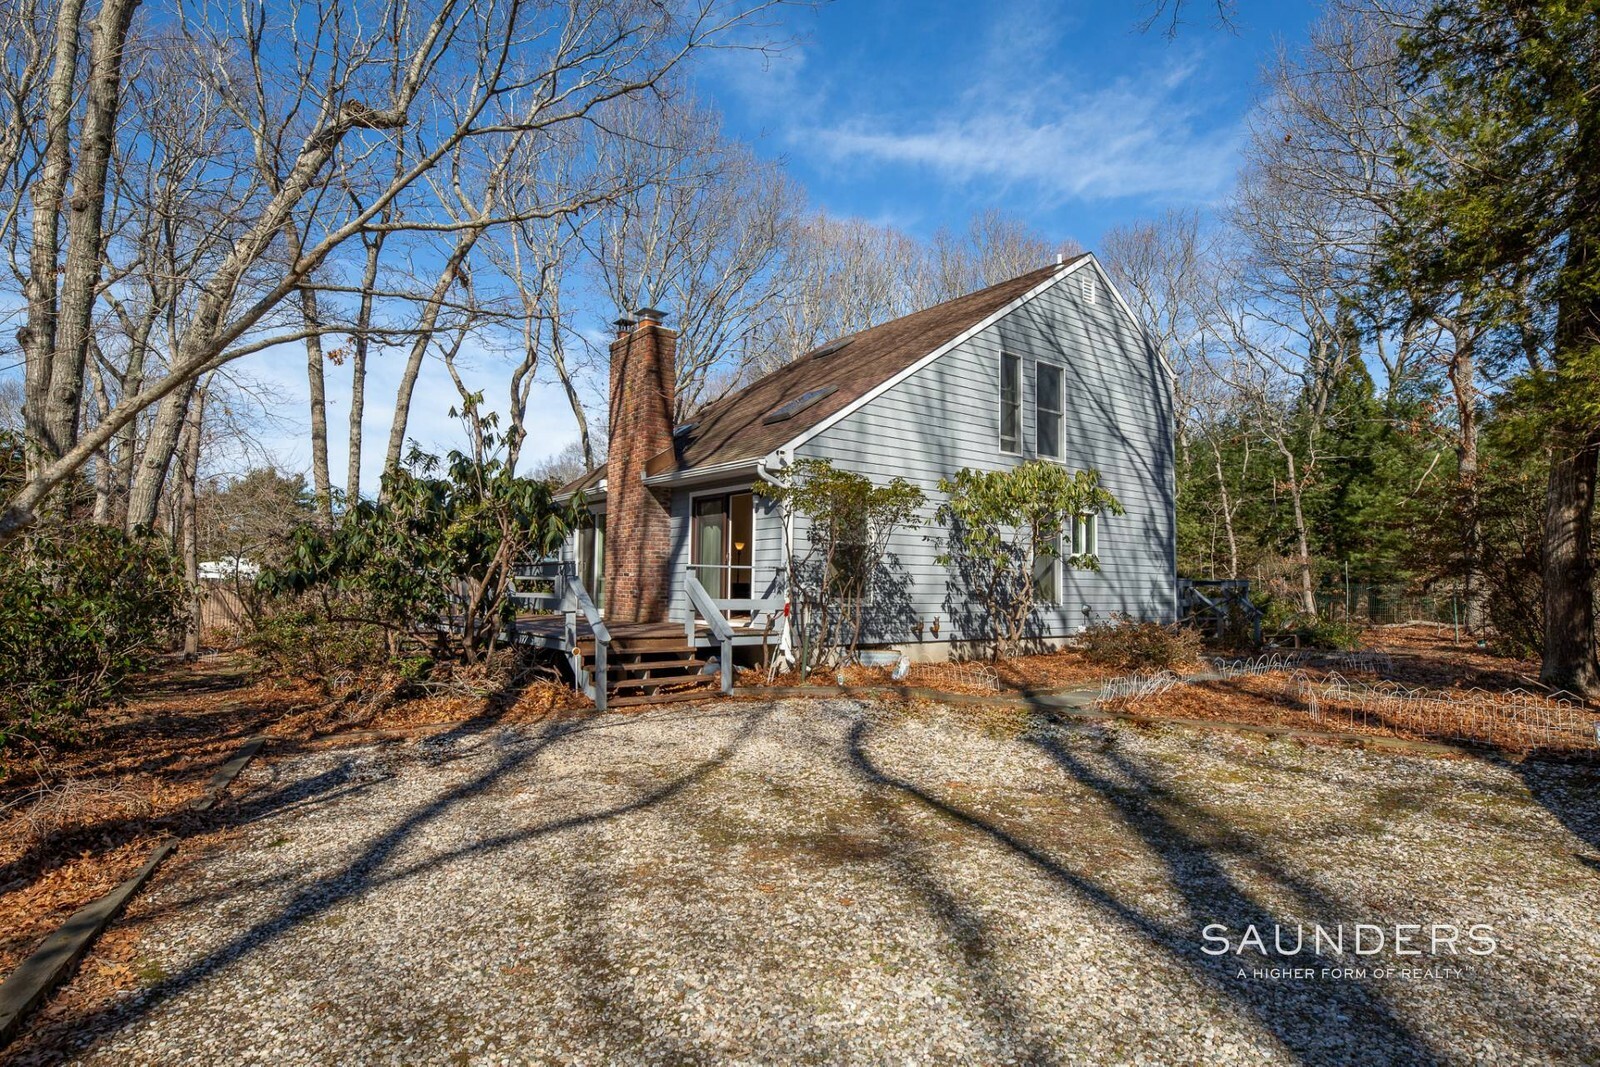 30 Hildreth Place in East Hampton, a 1,500-square-foot home on .4 acres, was last listed for $875,000 and is under contract. COURTESY SAUNDERS & ASSOCIATES